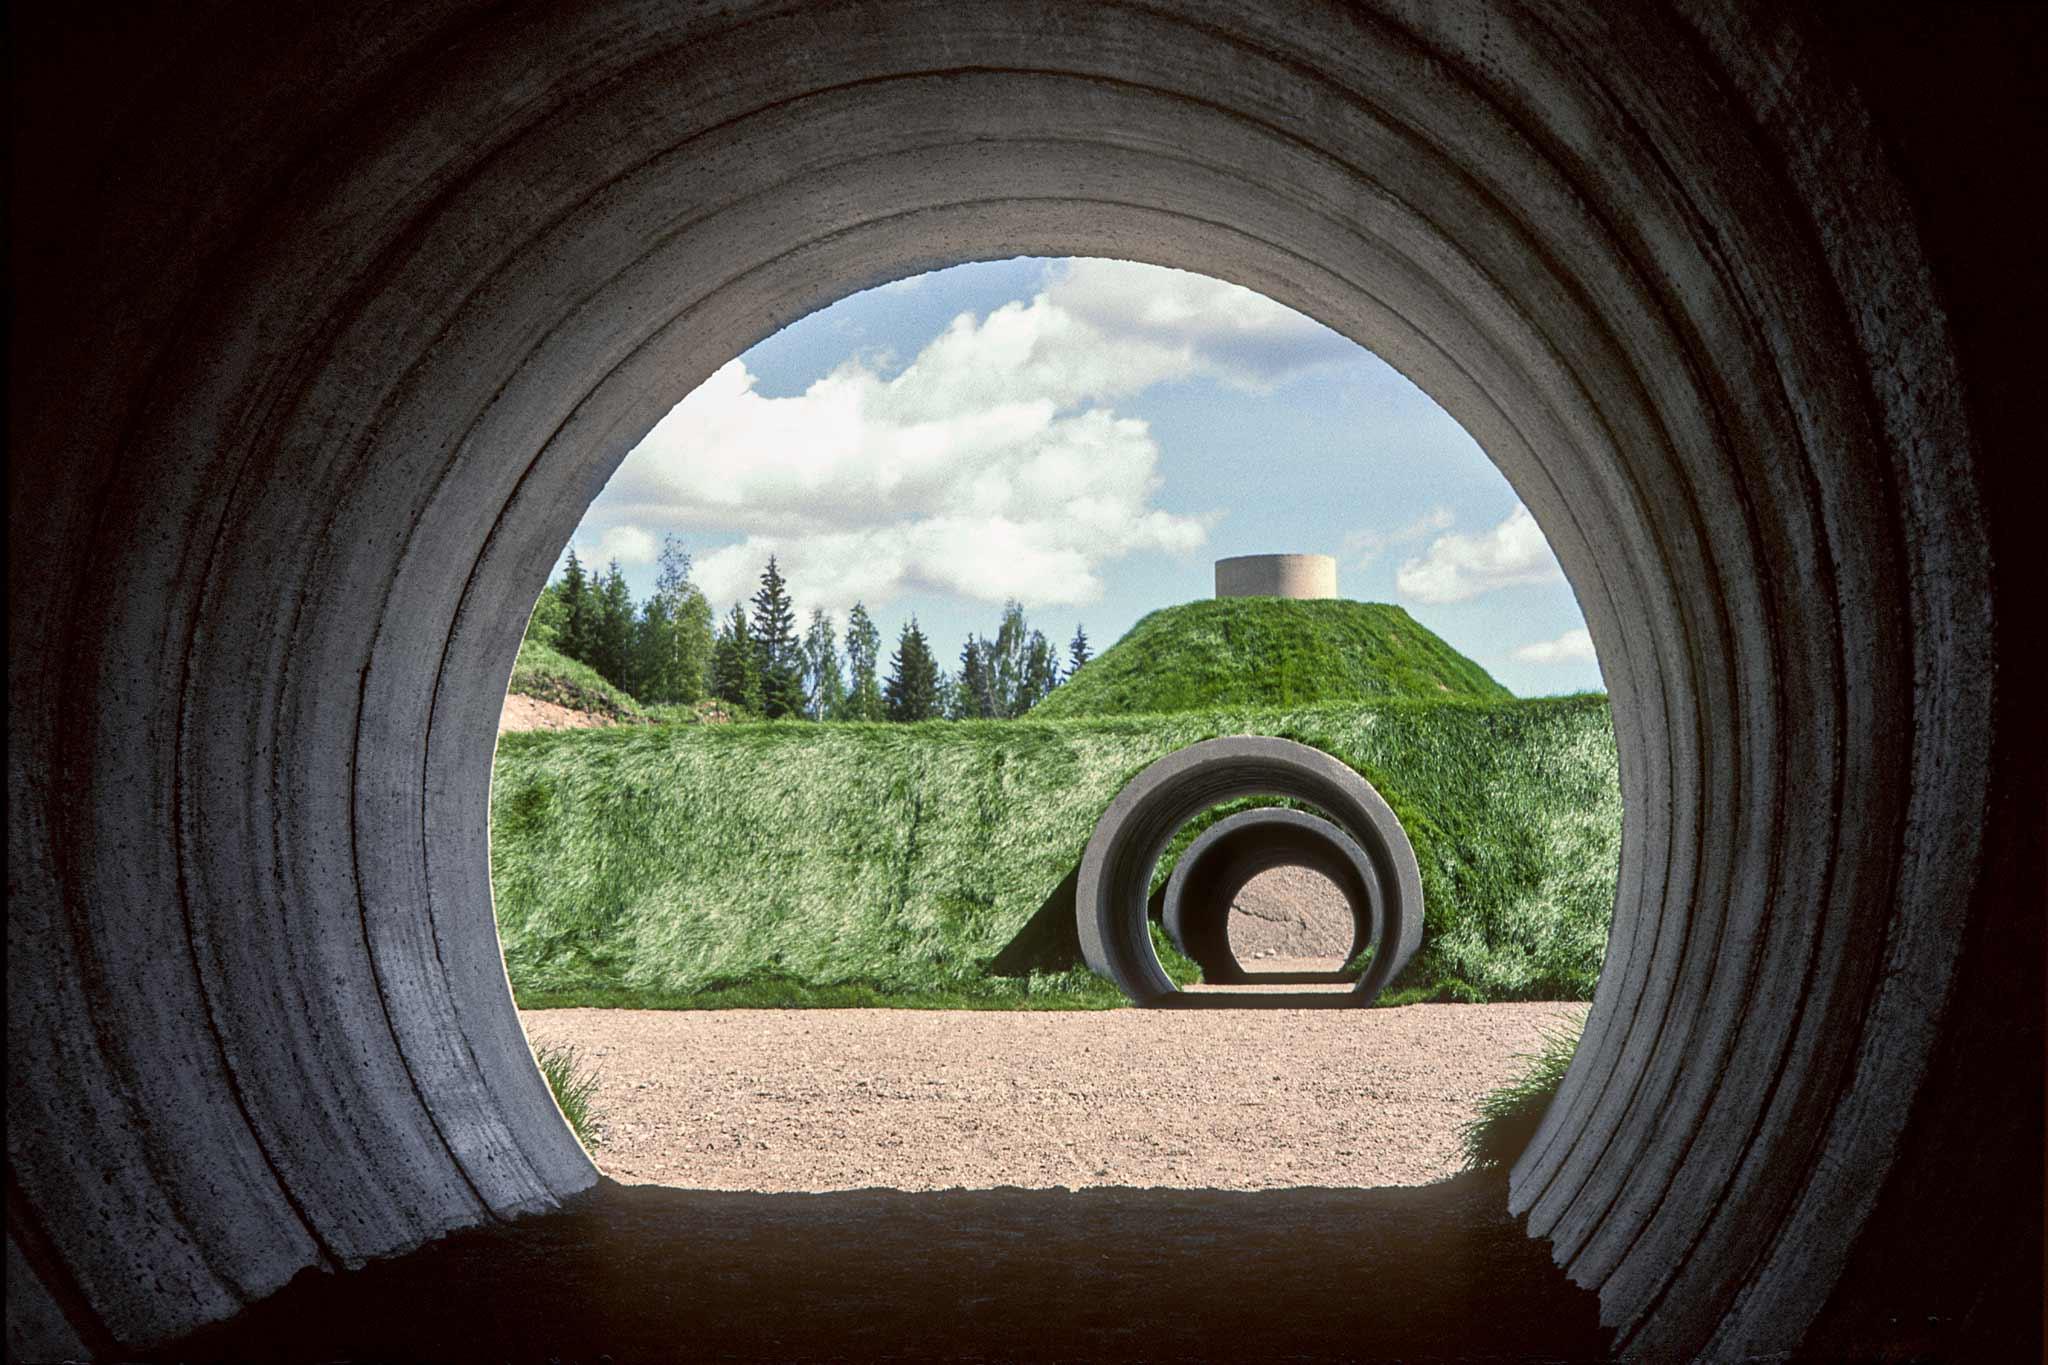 Interior view of a circular tunnel looking out onto a mound of earth with tunnels cutting through it.